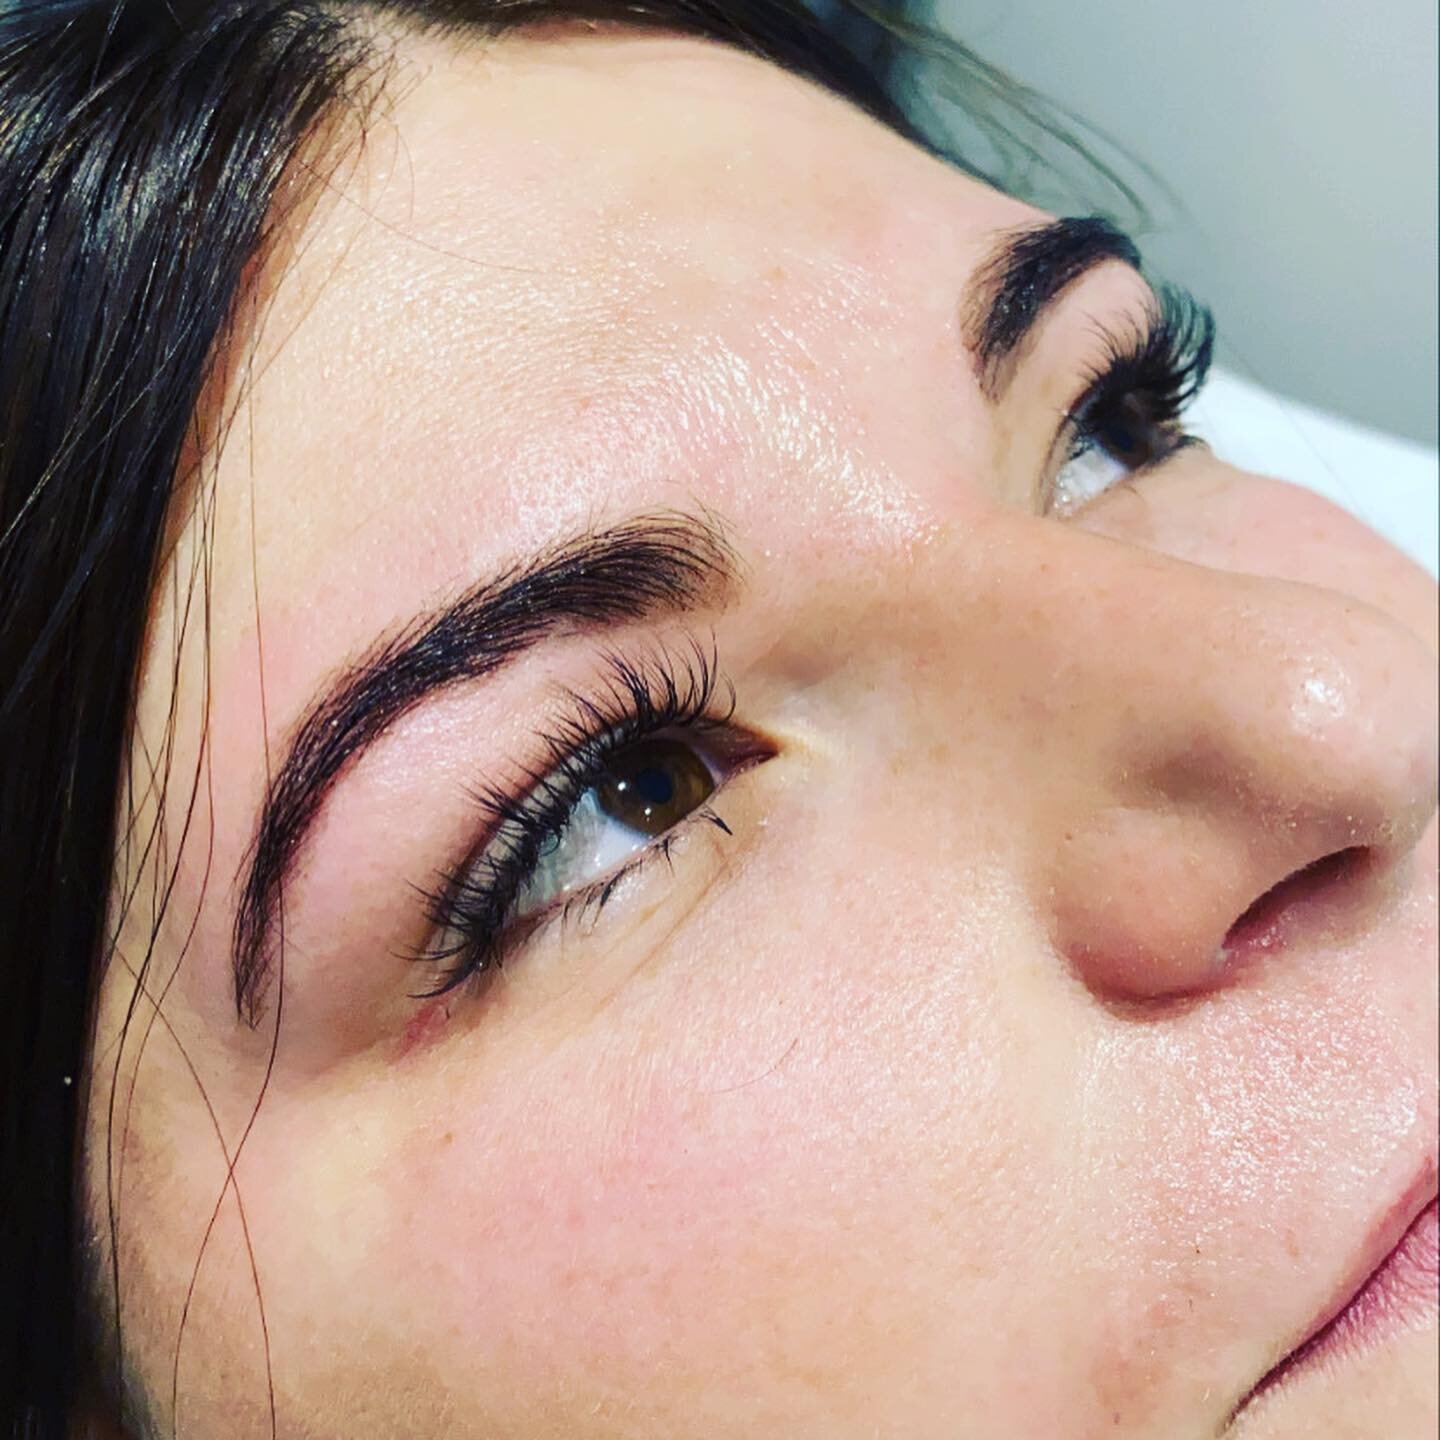 The process of henna brows... a relaxing 45/1hr treatment that defines the brow and deepens the colour for a lasting effect.
Pain free and lasts up to 6 weeks on the hair. Wax included 
All natural products used 🌱&pound;30 

#hennabrows #browhenna #